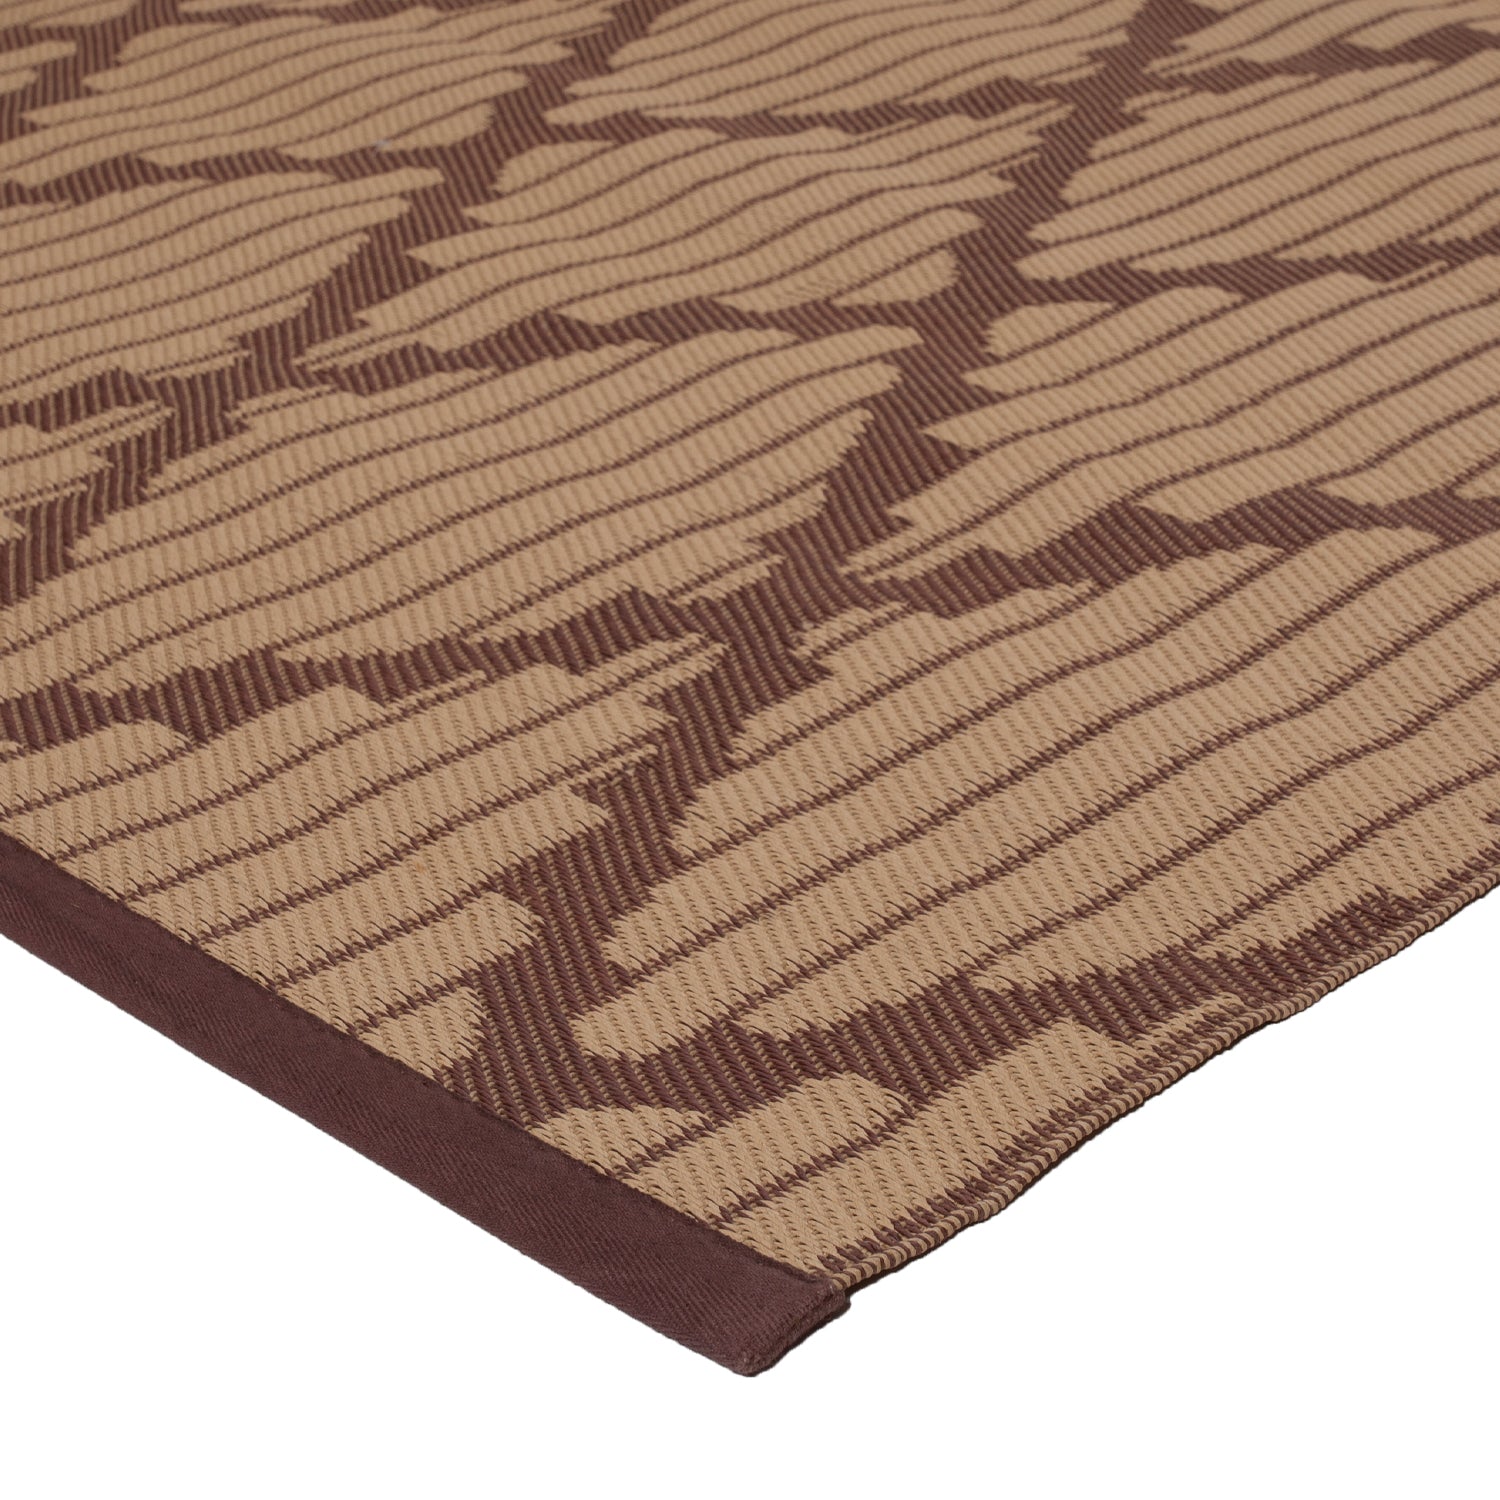 Close-up of a patterned rug with dark brown and tan stripes.